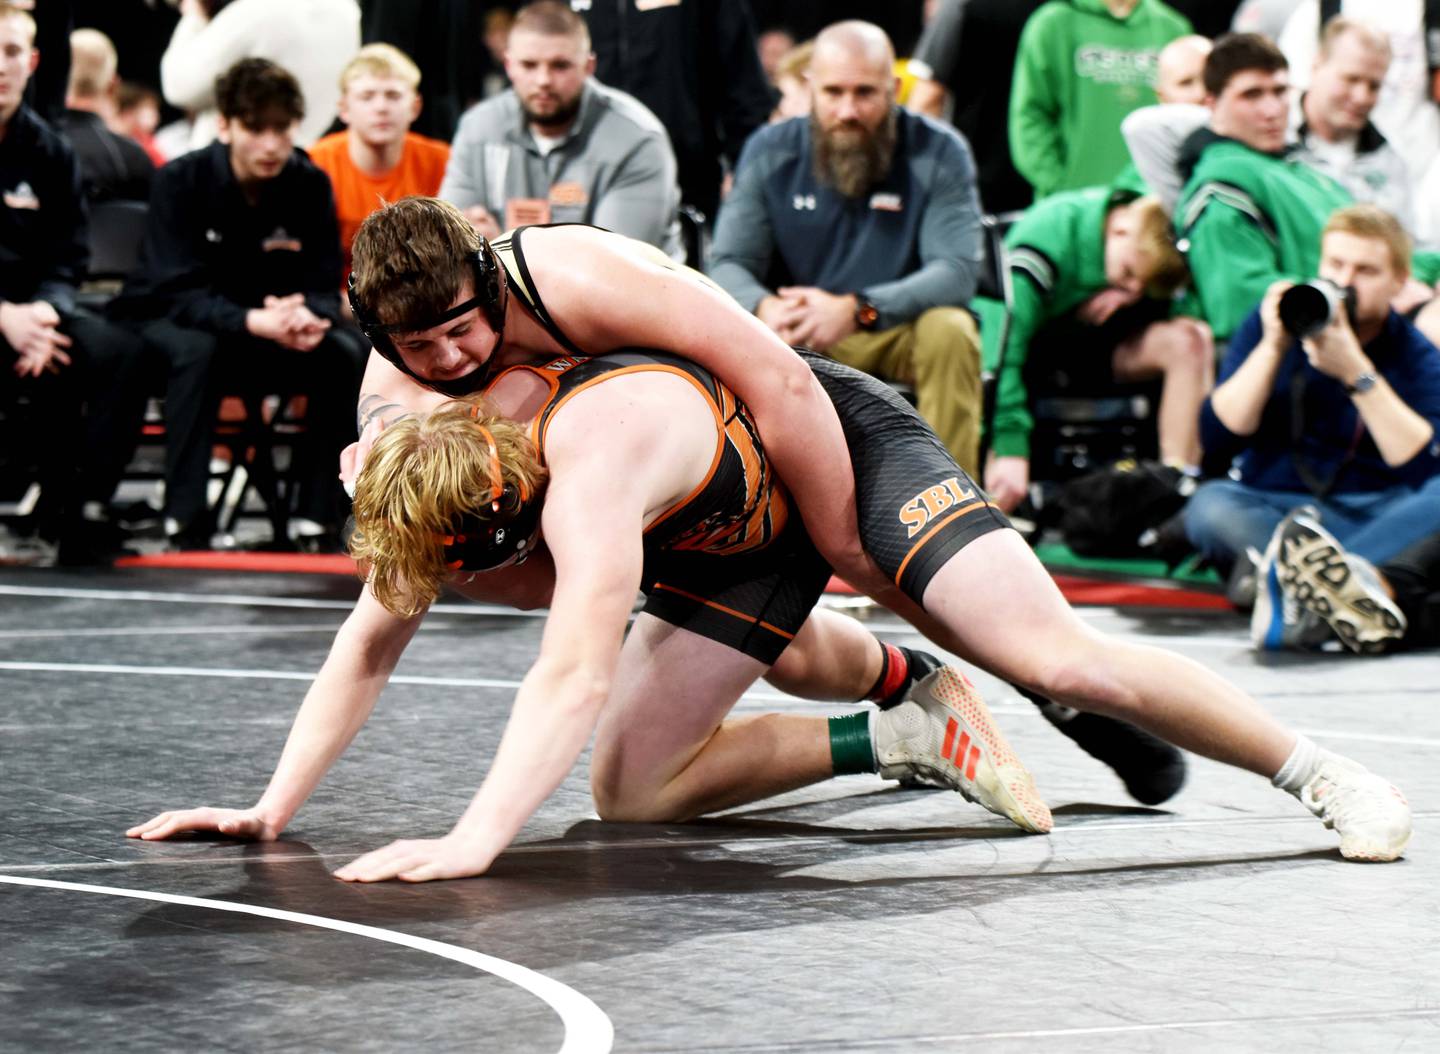 Senior Jagger Luther maintains control of Will Ryan in the final match of the Class 2A State Duals finals. Before Luther took the mat, the dual was tied at 33. Luther won the bout in a 7-1 decision, giving Creston its second State Duals title.